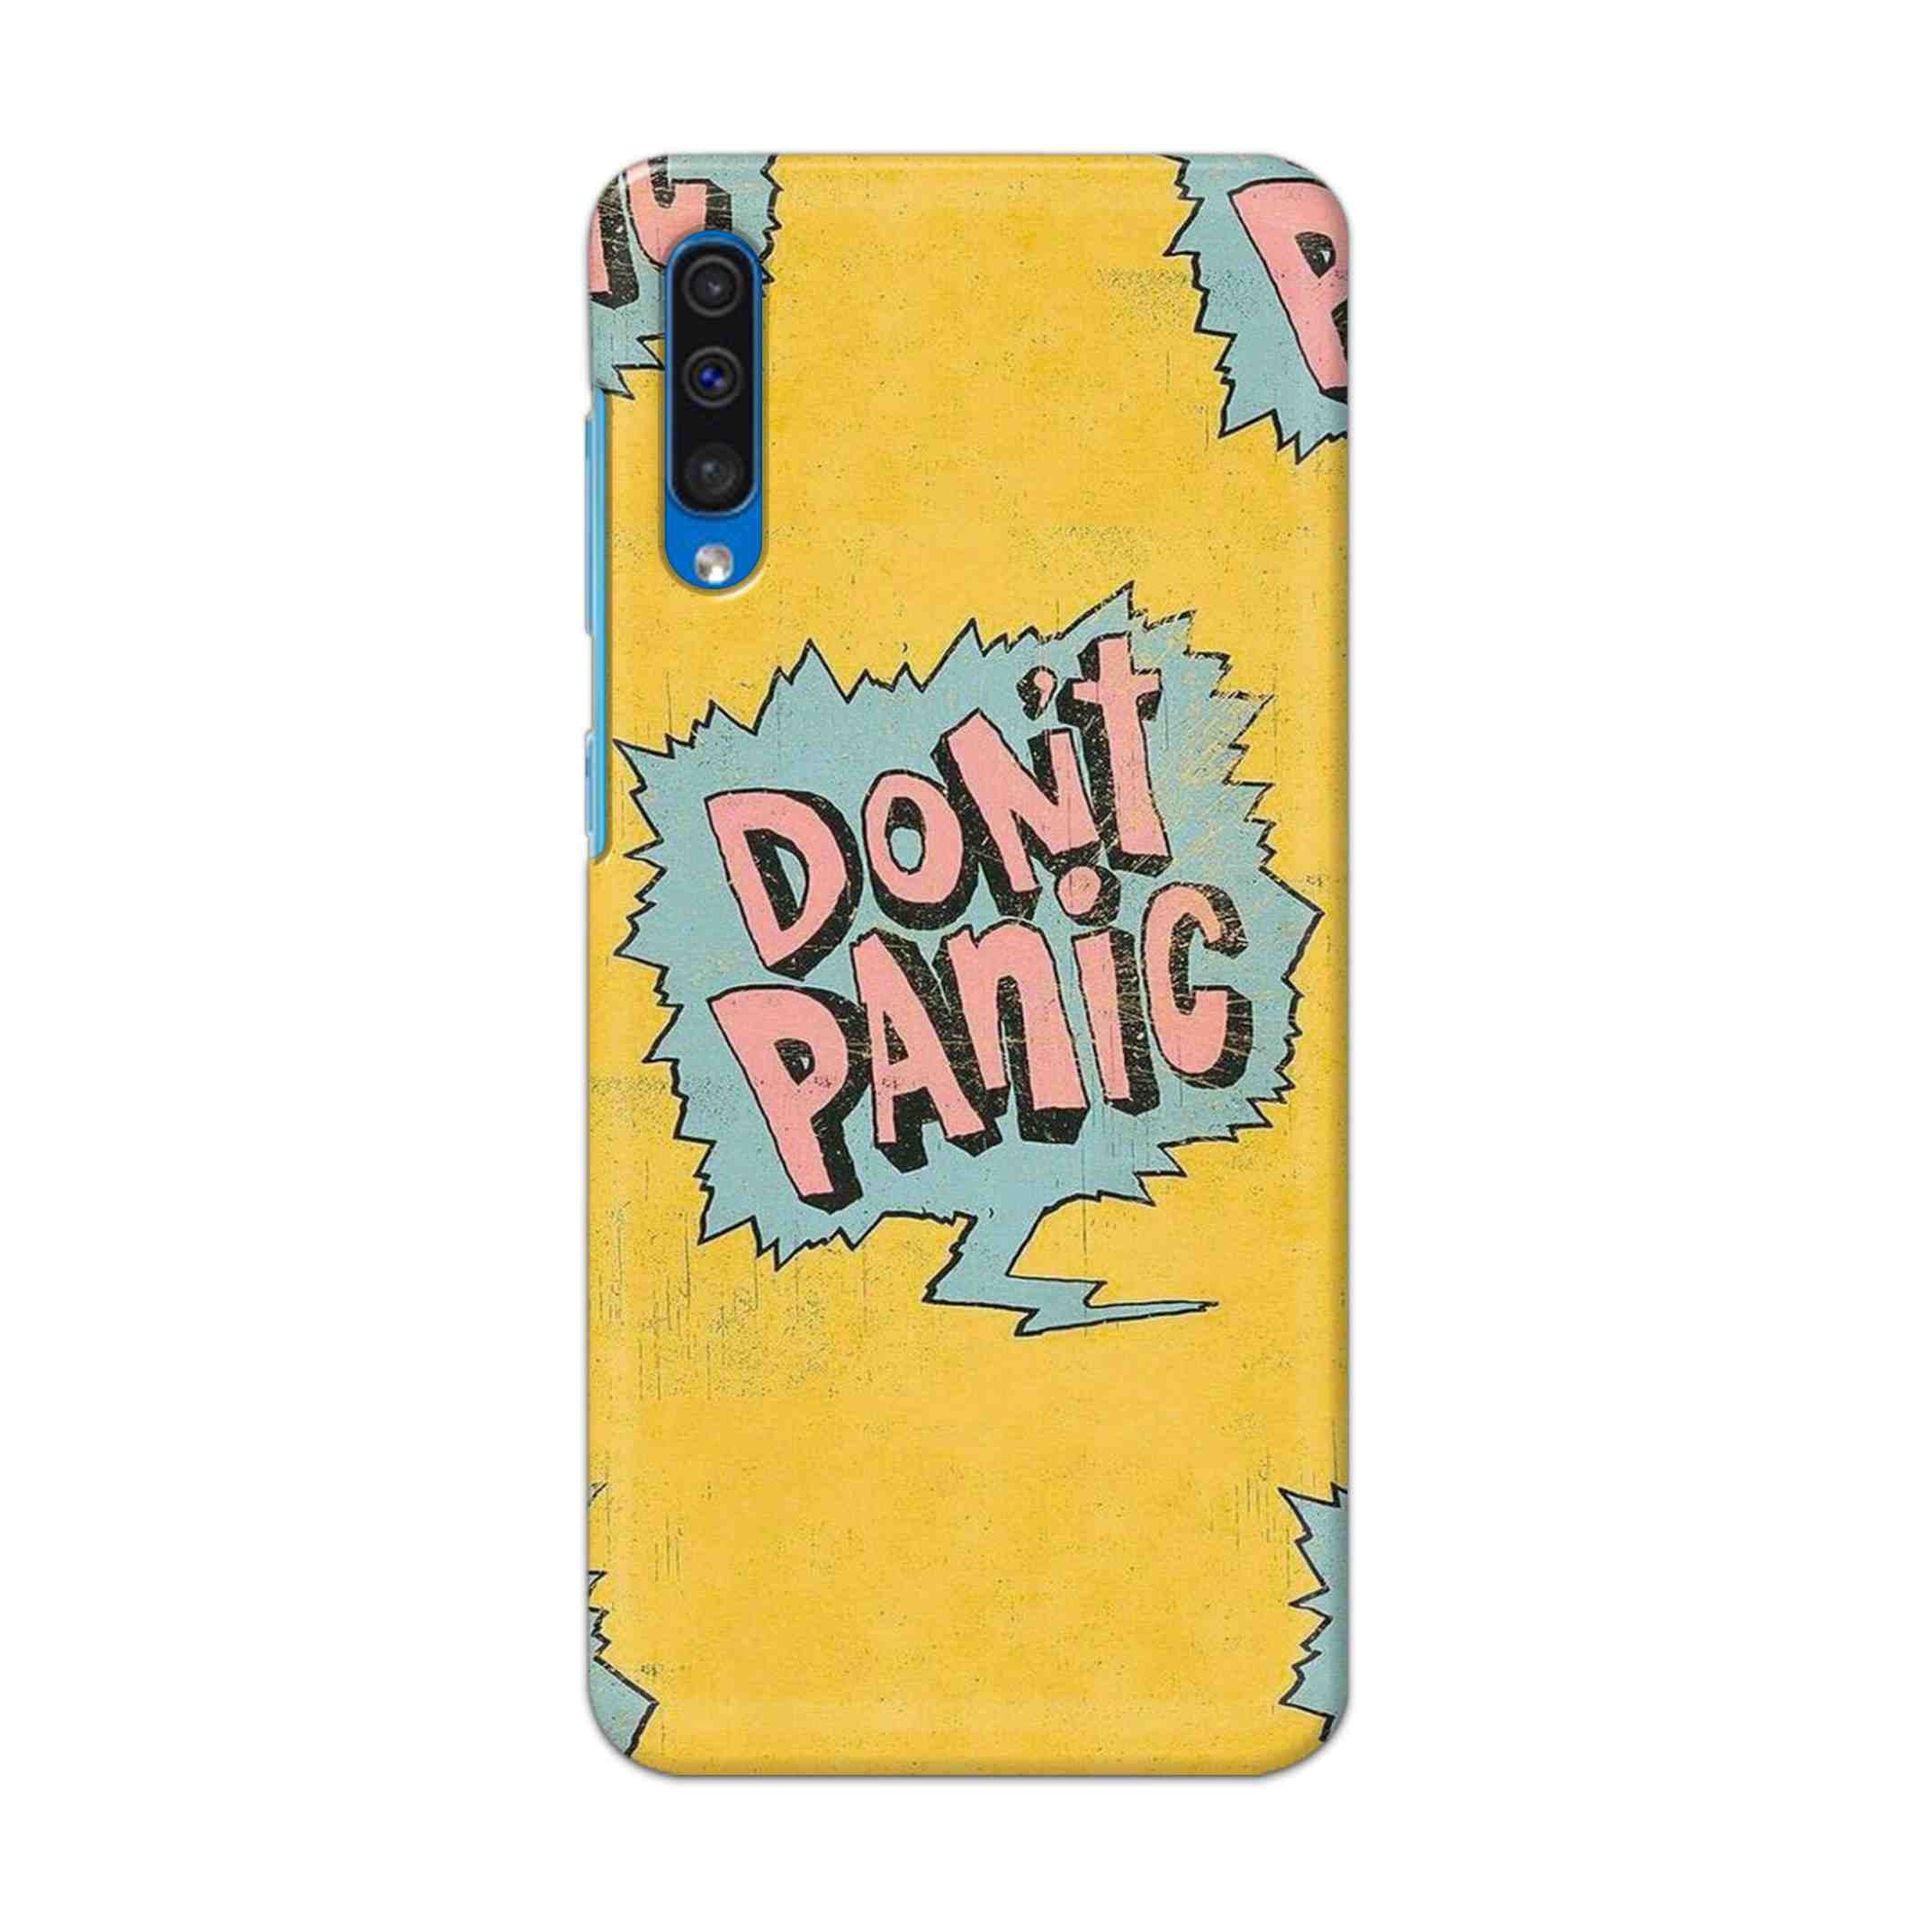 Buy Do Not Panic Hard Back Mobile Phone Case Cover For Samsung Galaxy A50 / A50s / A30s Online